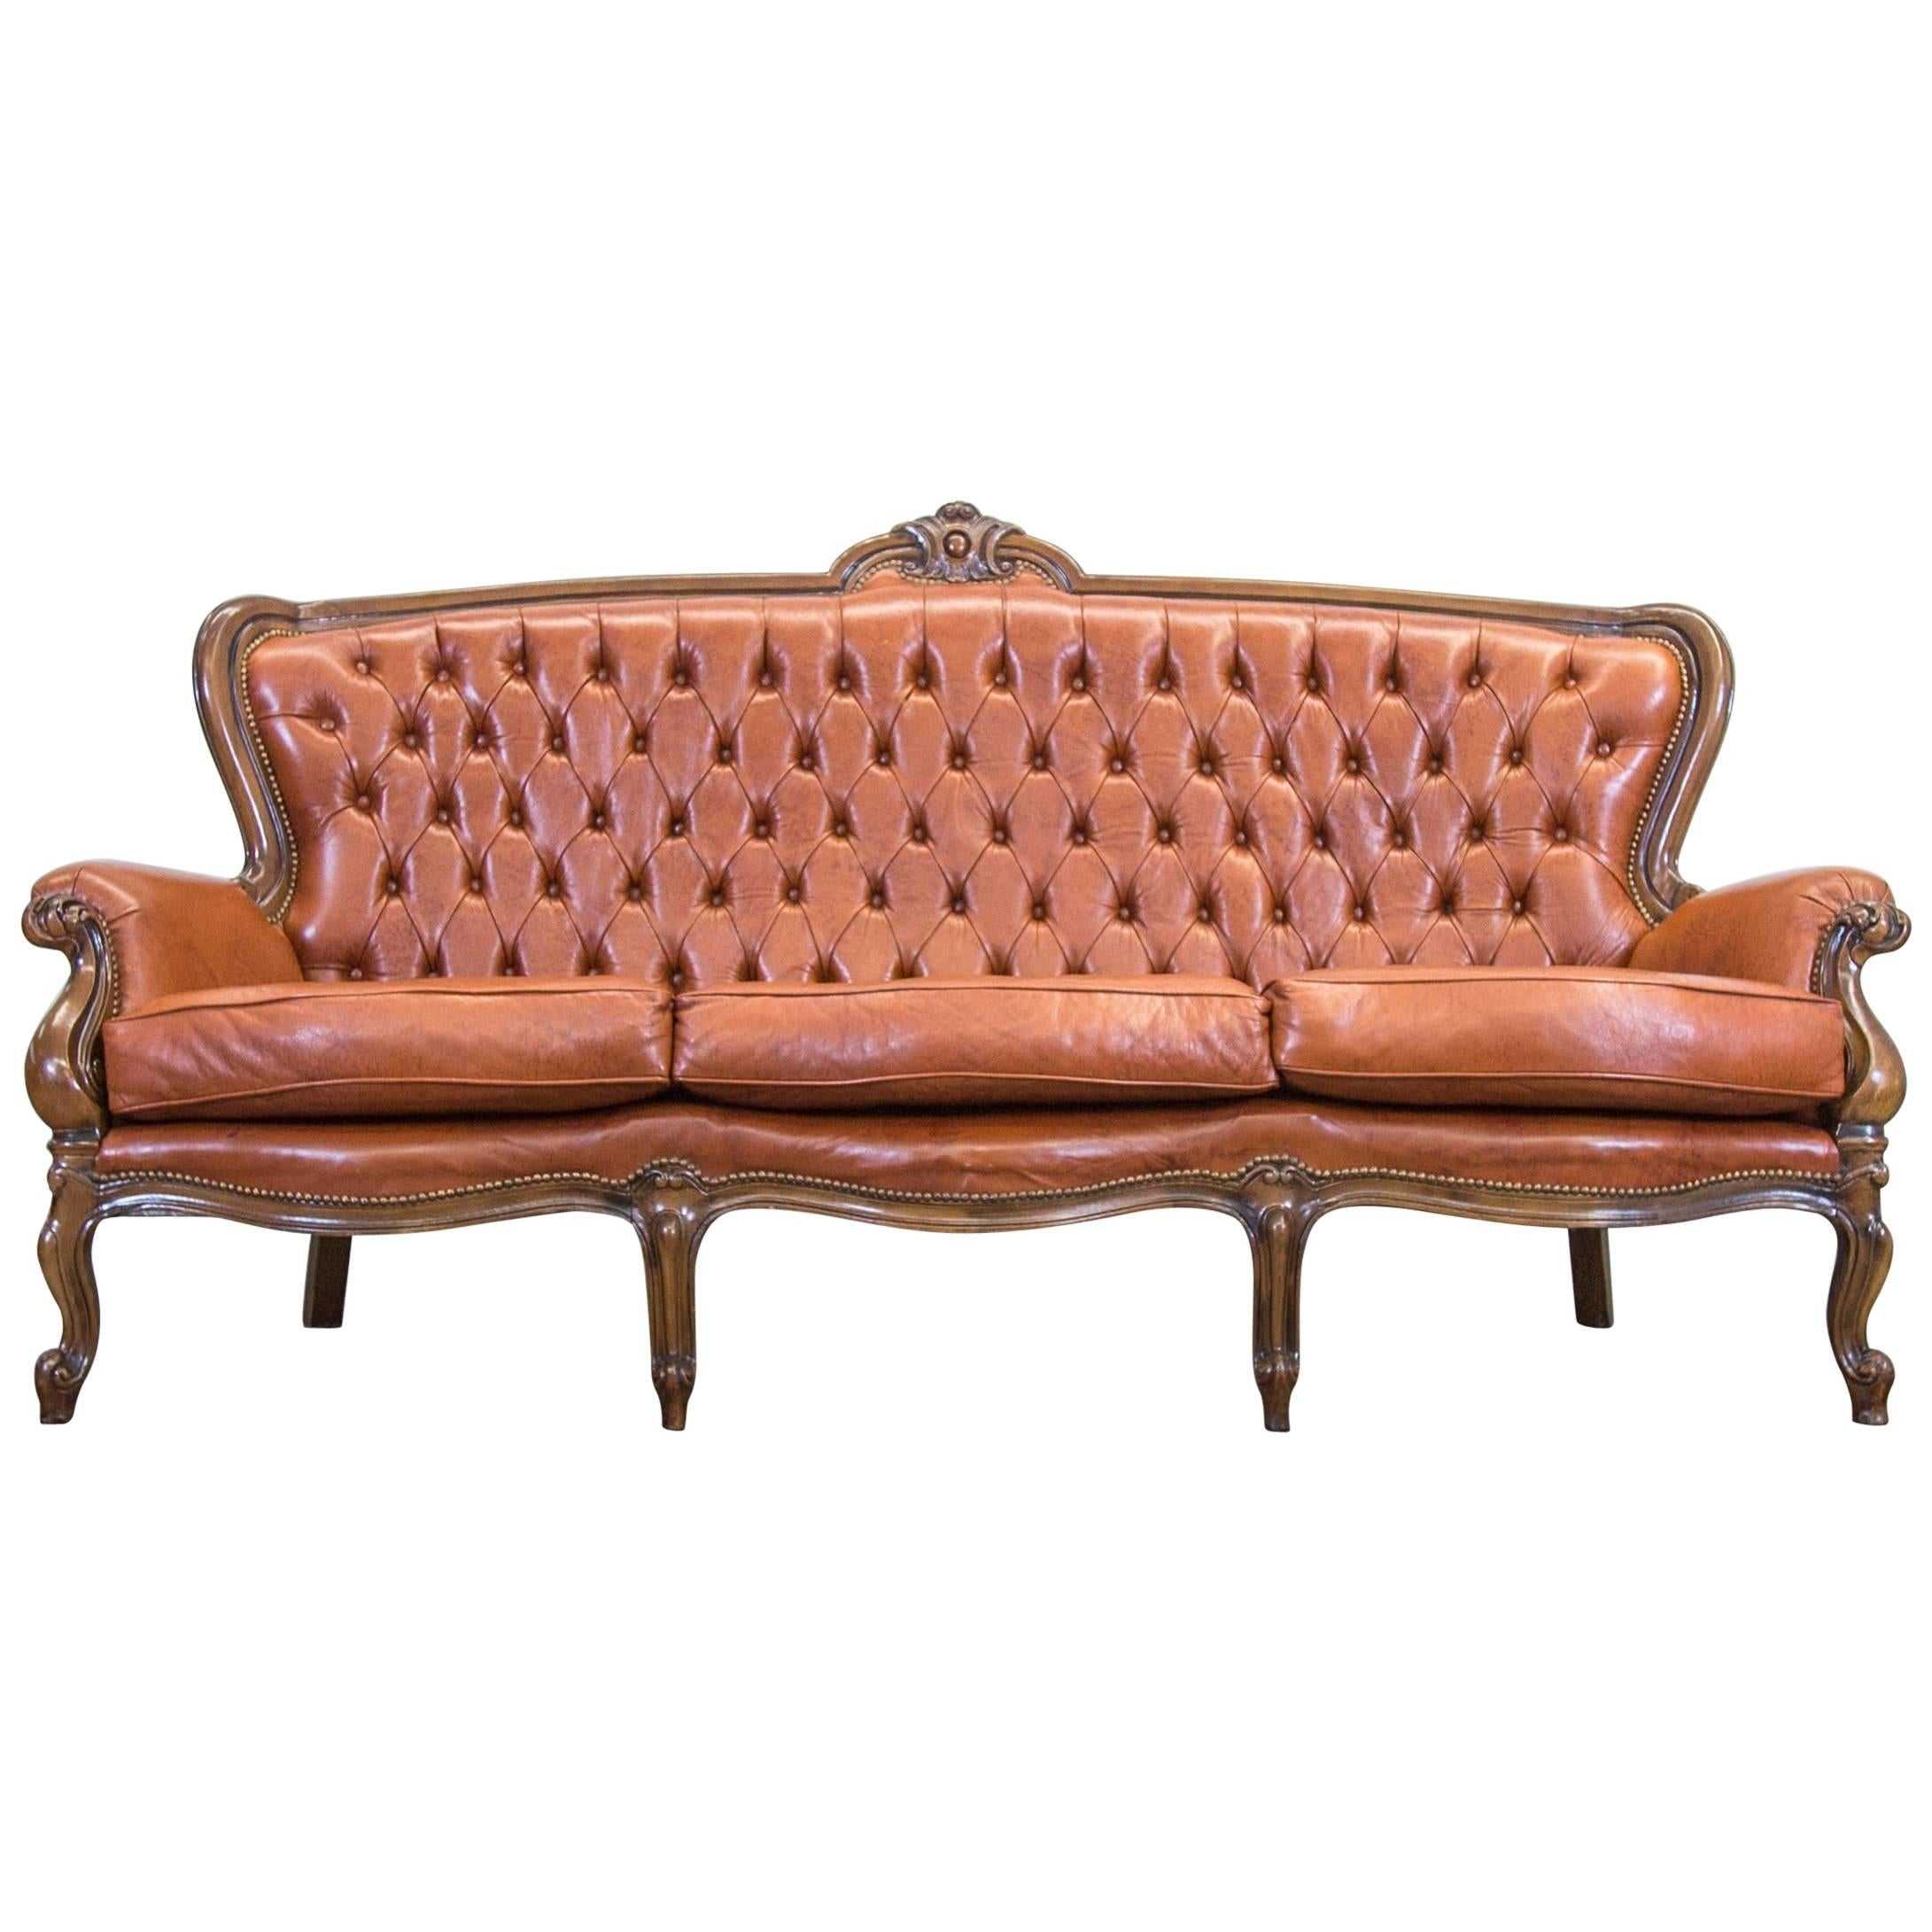 Chesterfield Leather Sofa Light Brown Three-Seat Couch Vintage Retro Wood